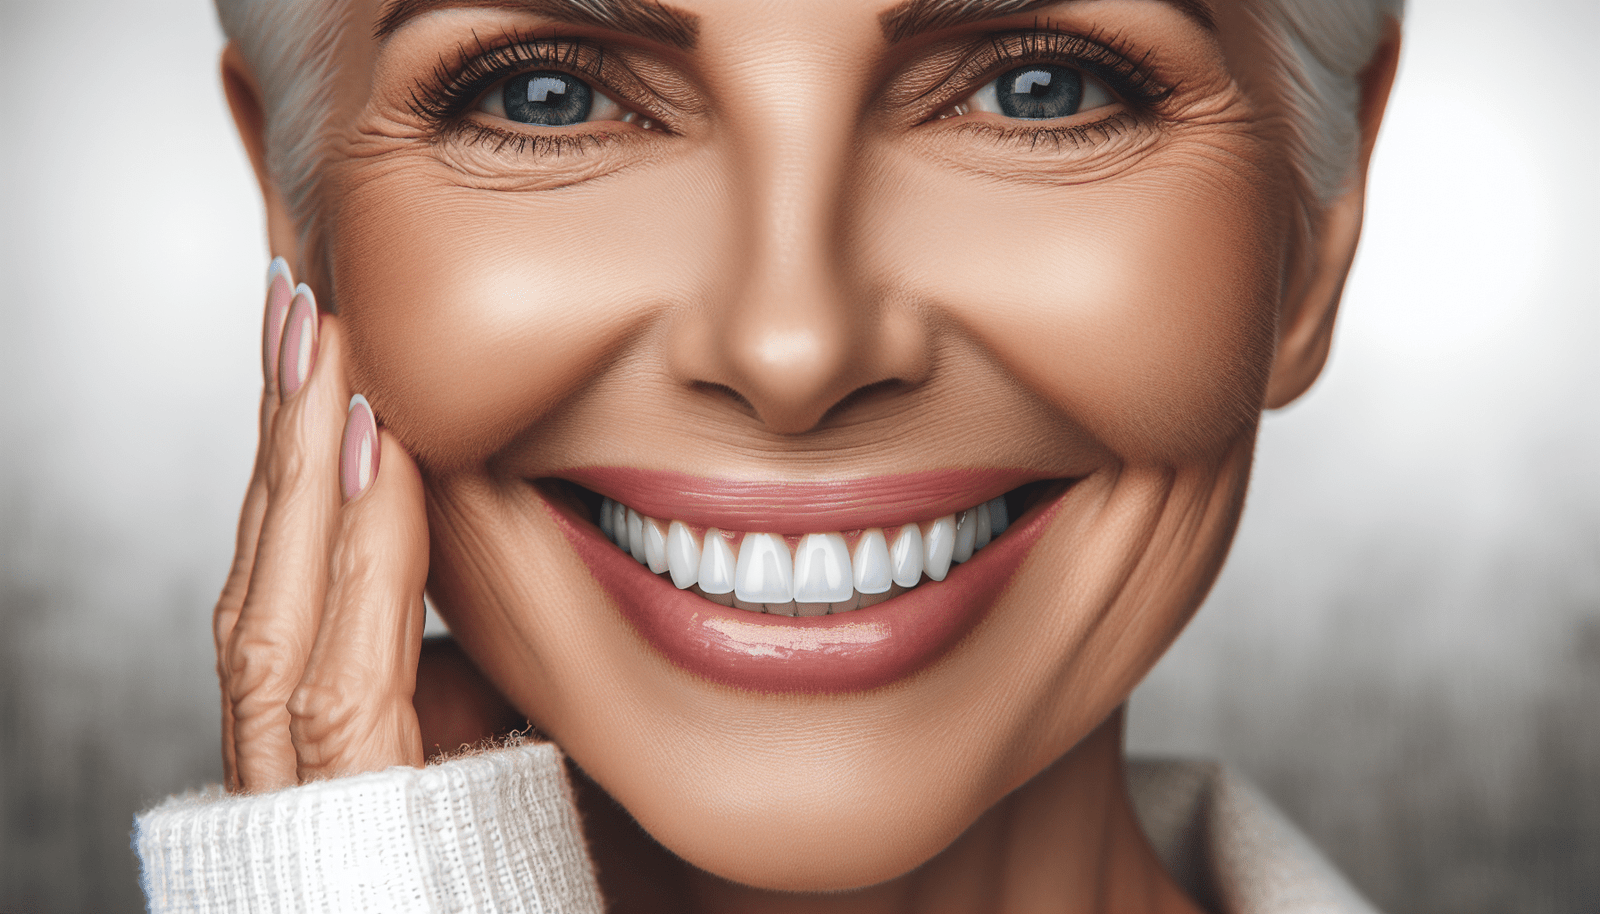 How Important Is Dental Health In The Aging Process?